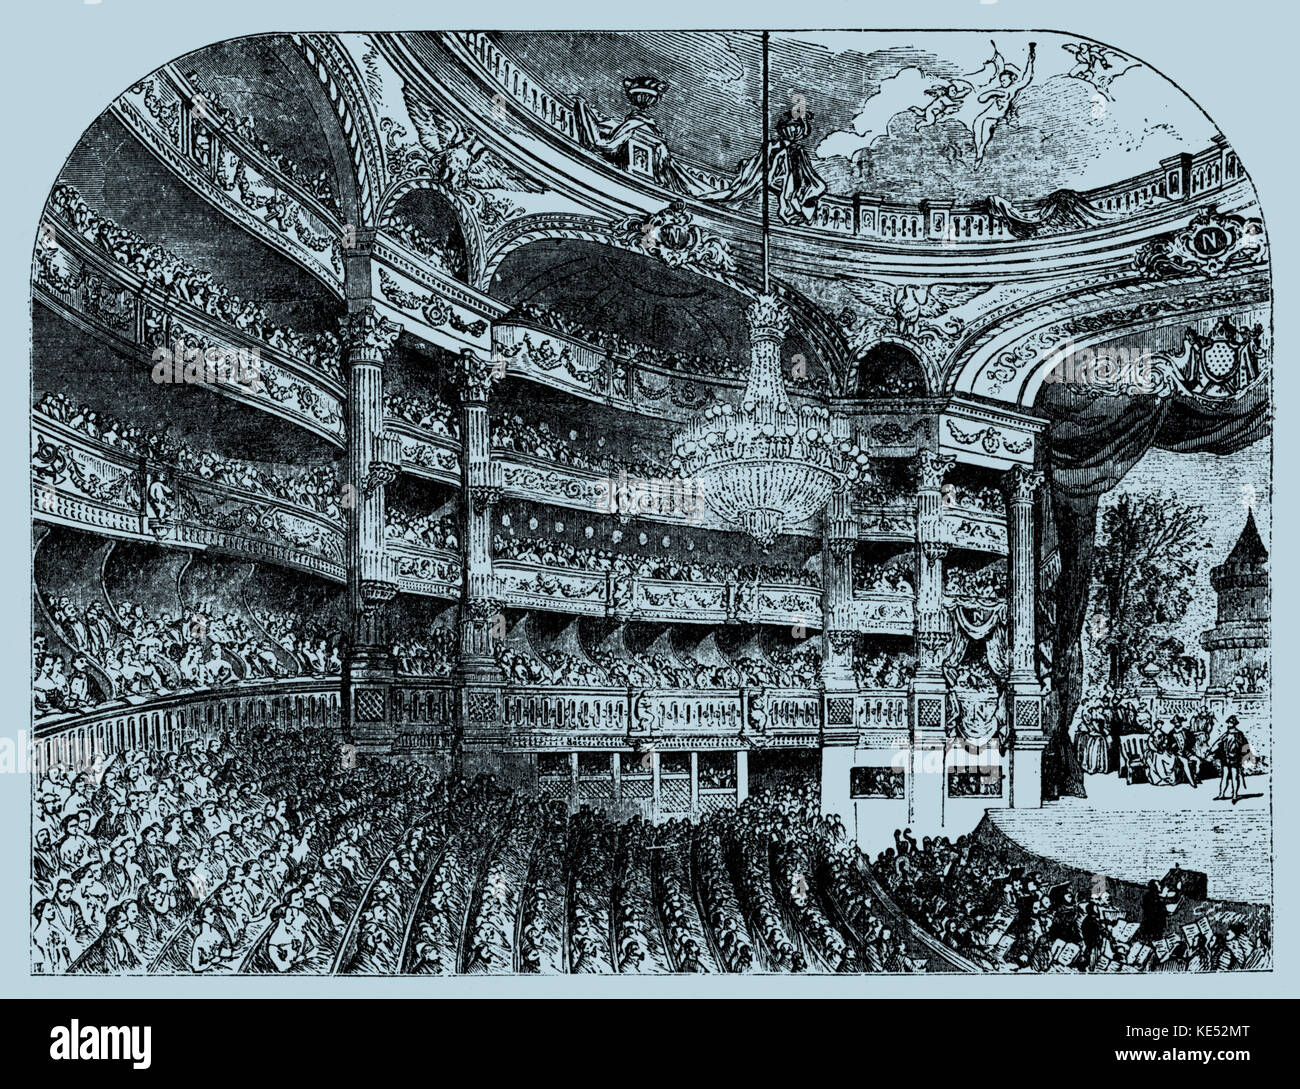 Interior of the Grand Opera House in the Rue le Peletier (1821 - 1873). Also known as the Théâtre de l'Académie Royale de Musique or the Paris Opera. Was the principal venue of the Parisian opera (from 1822) and ballet companies until its destruction by fire in 1873. Stock Photo